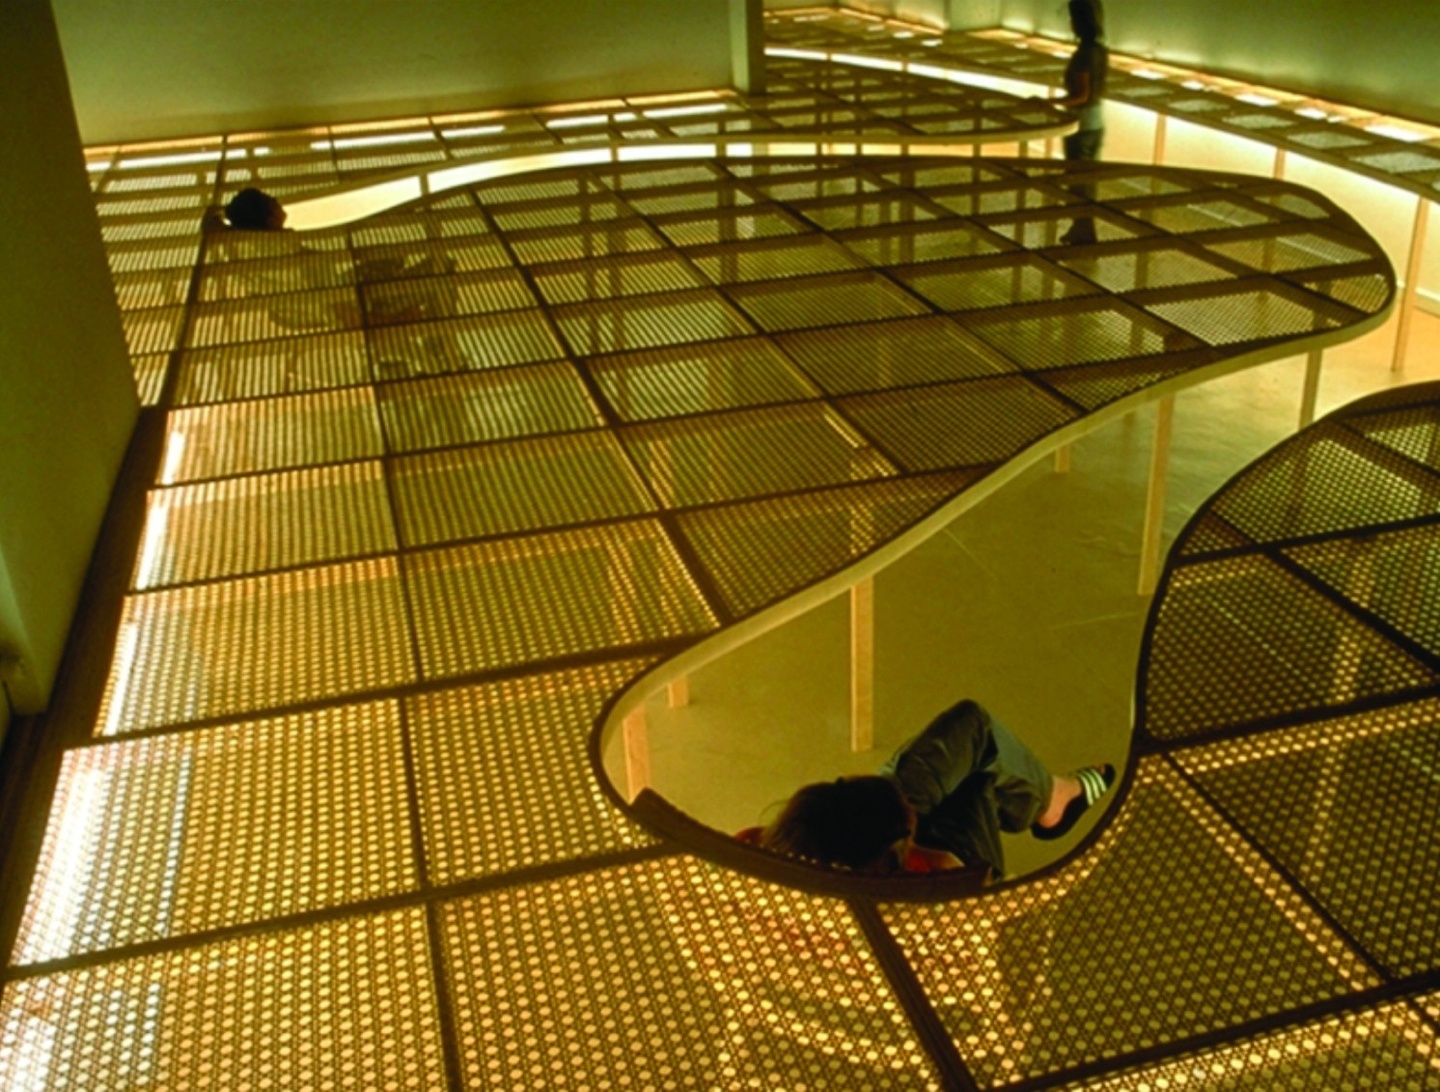 A dimly lit space, fluorescent lights illuminating the edge of a raised level of see-through architectural forms: two people sit in chairs below, as if sunken into the ground, so that they can see above the partitions into the vast space. Another person stands in the background.